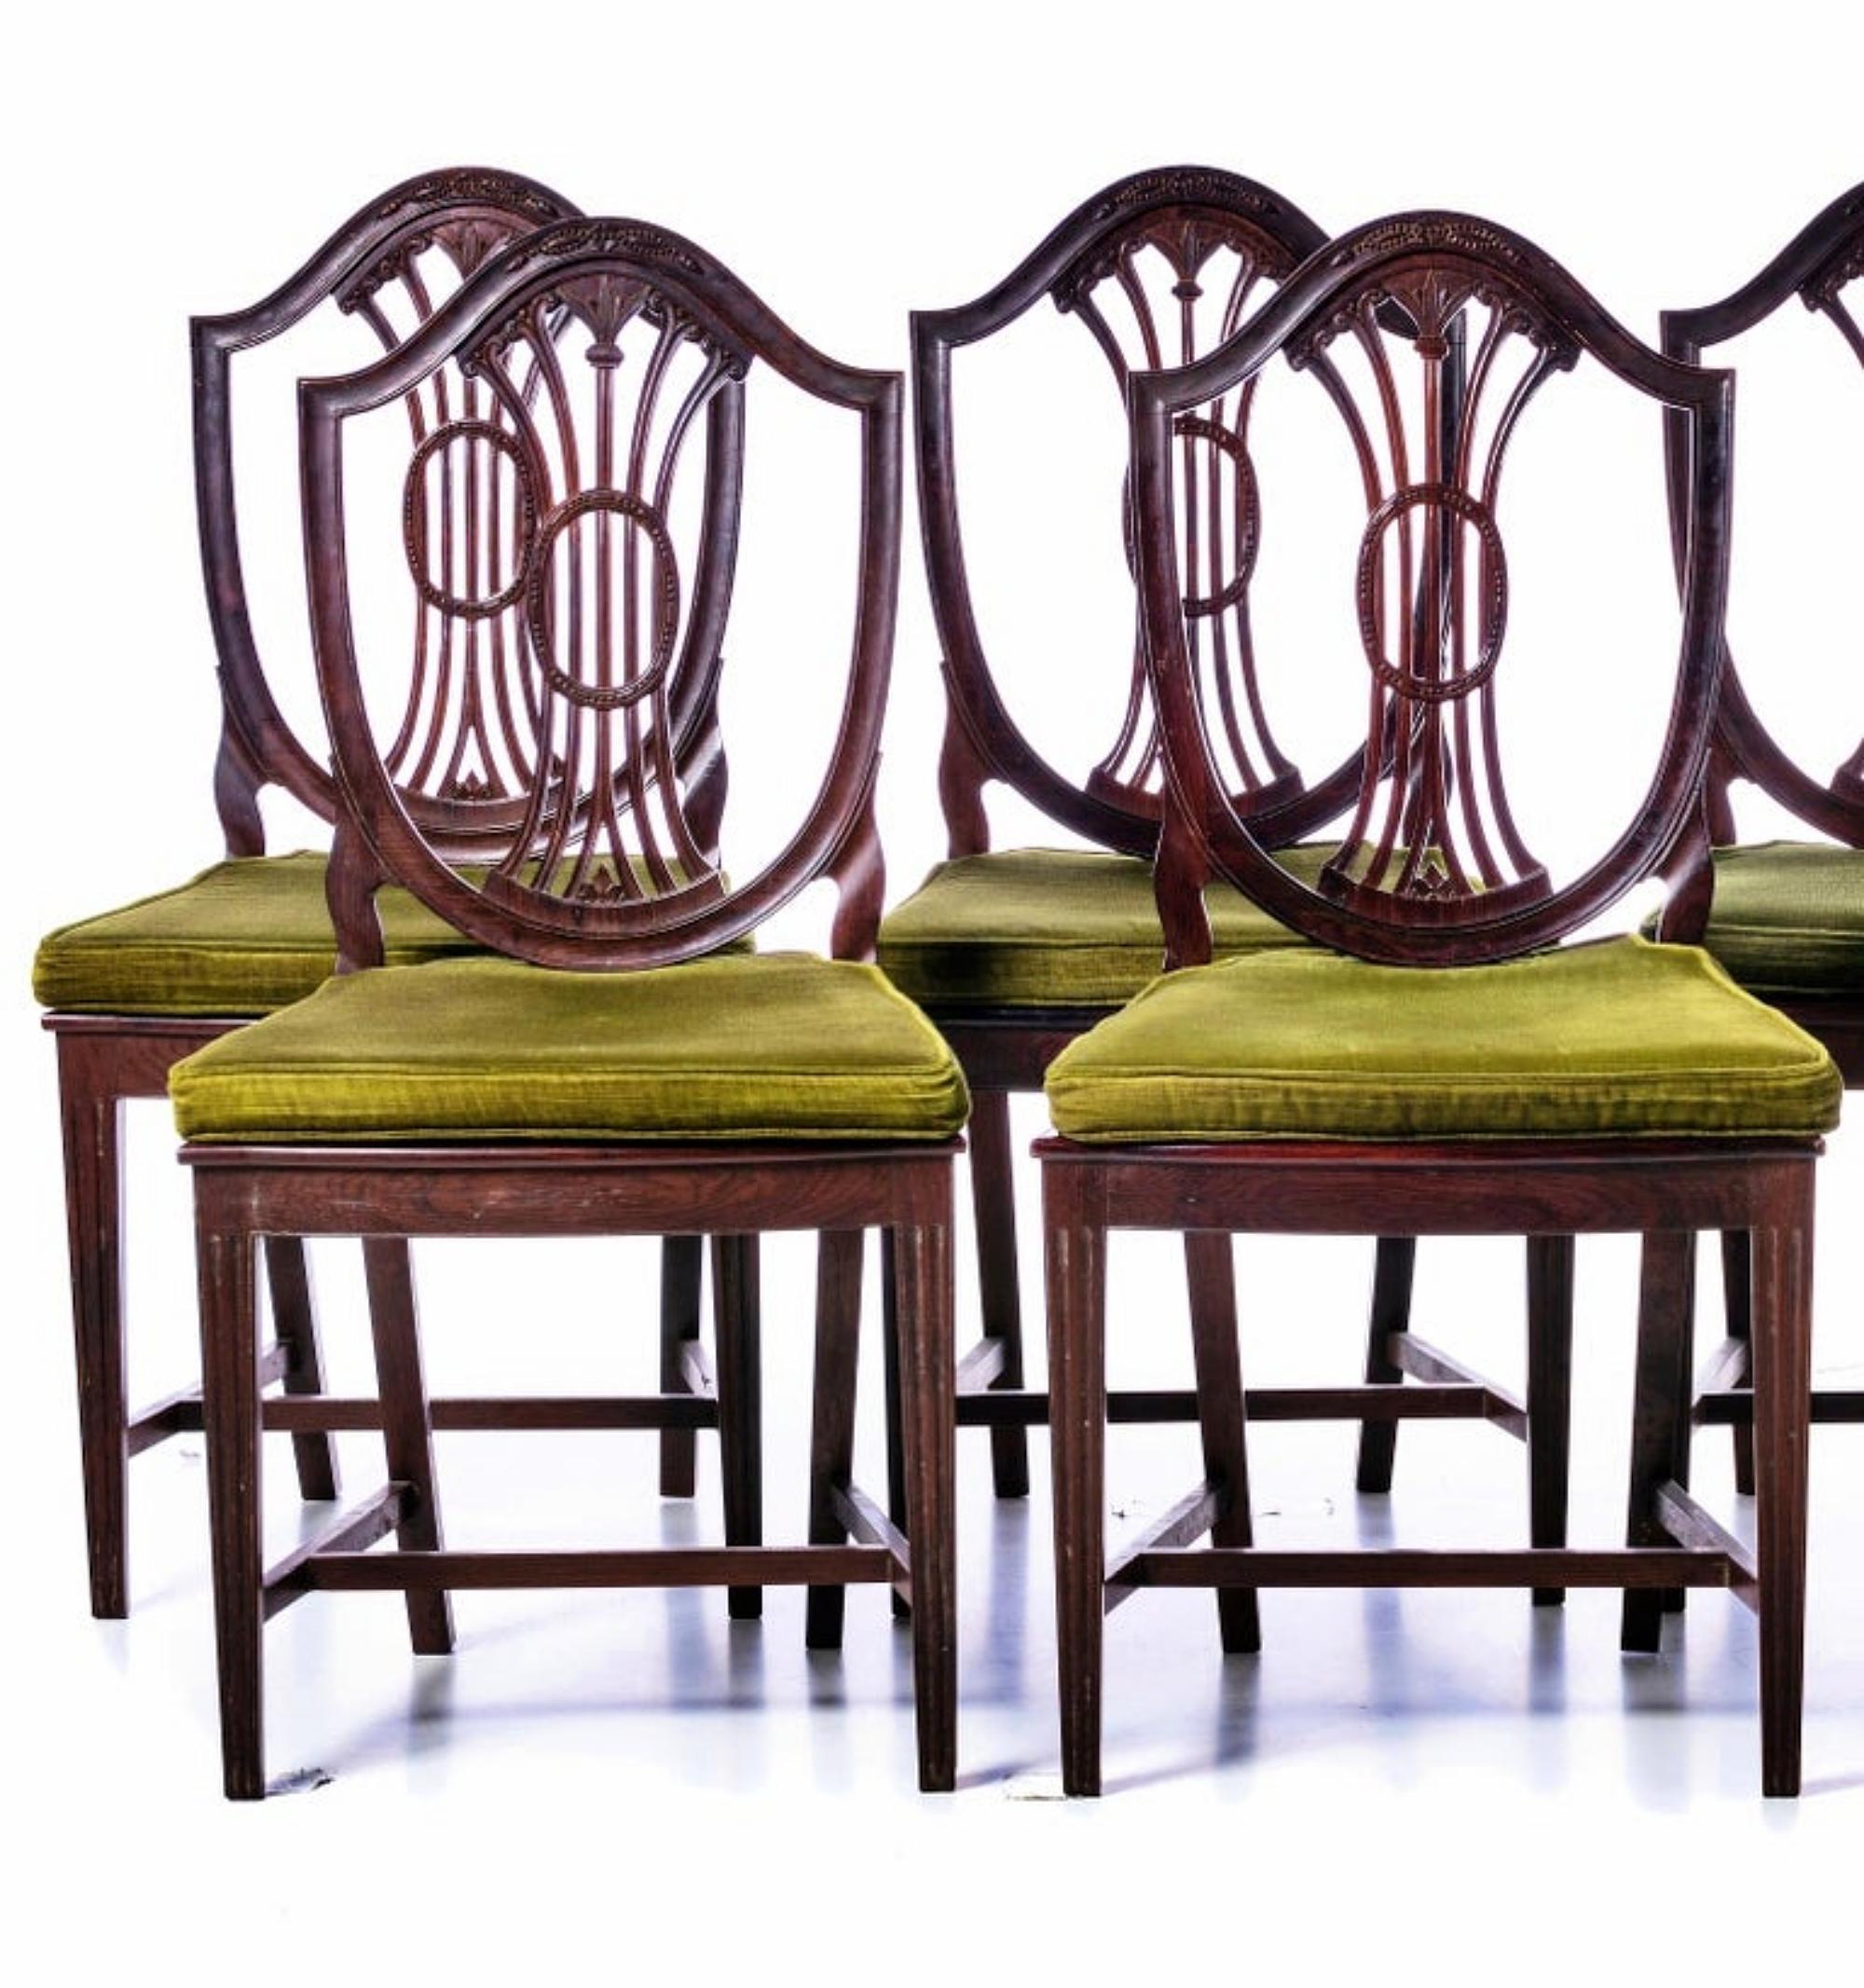 Hand-Crafted Lot of 6 Chairs Portuguese 19th Century in Brazilian Rosewood